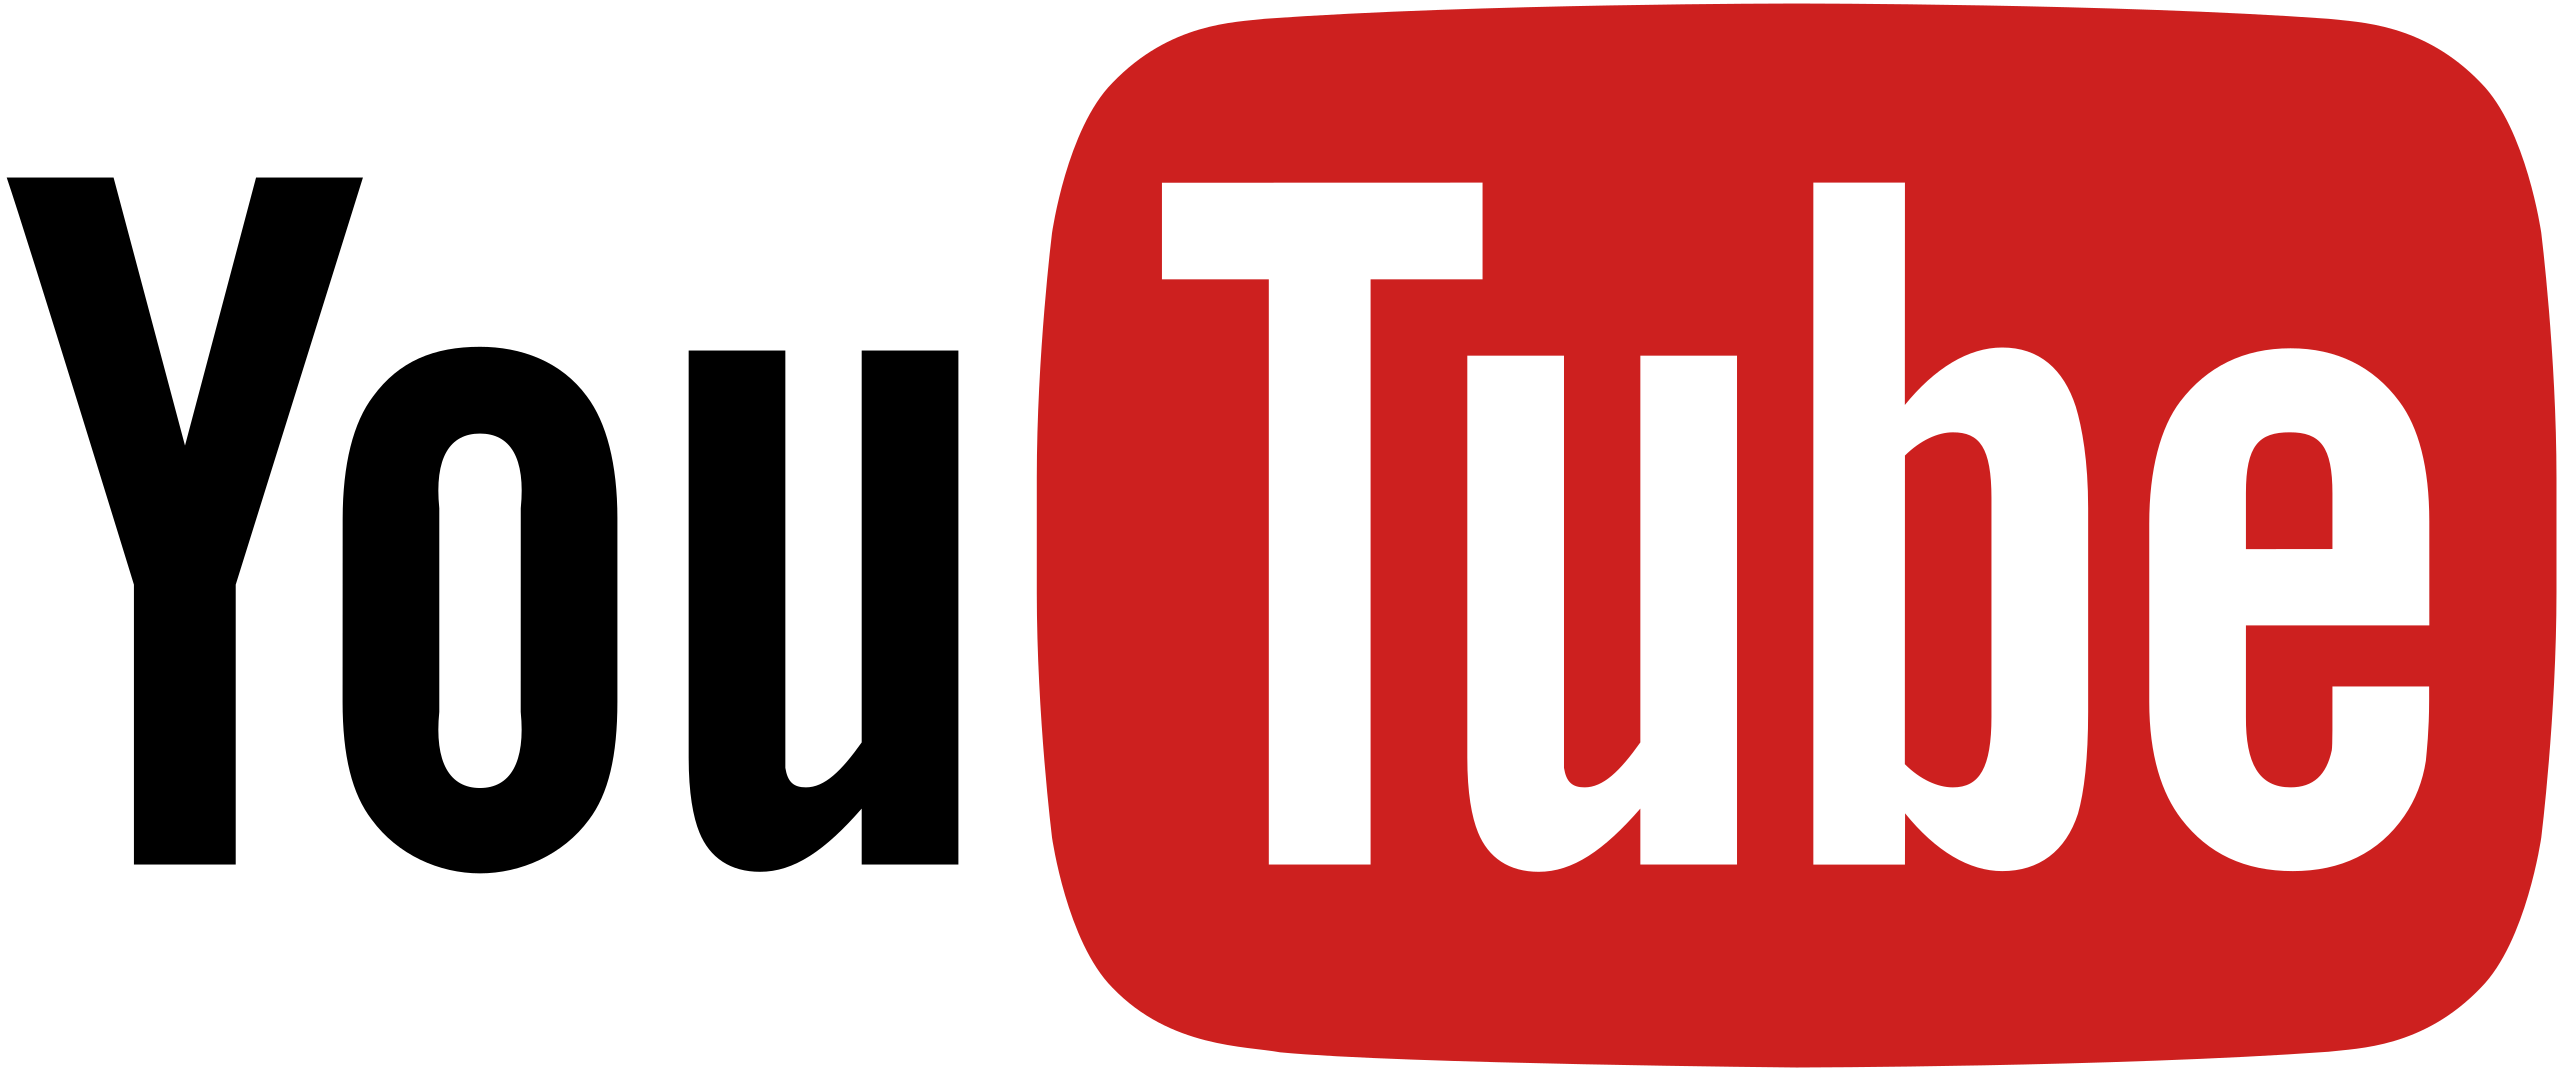 YouTube is the world's most popular video sharing website.